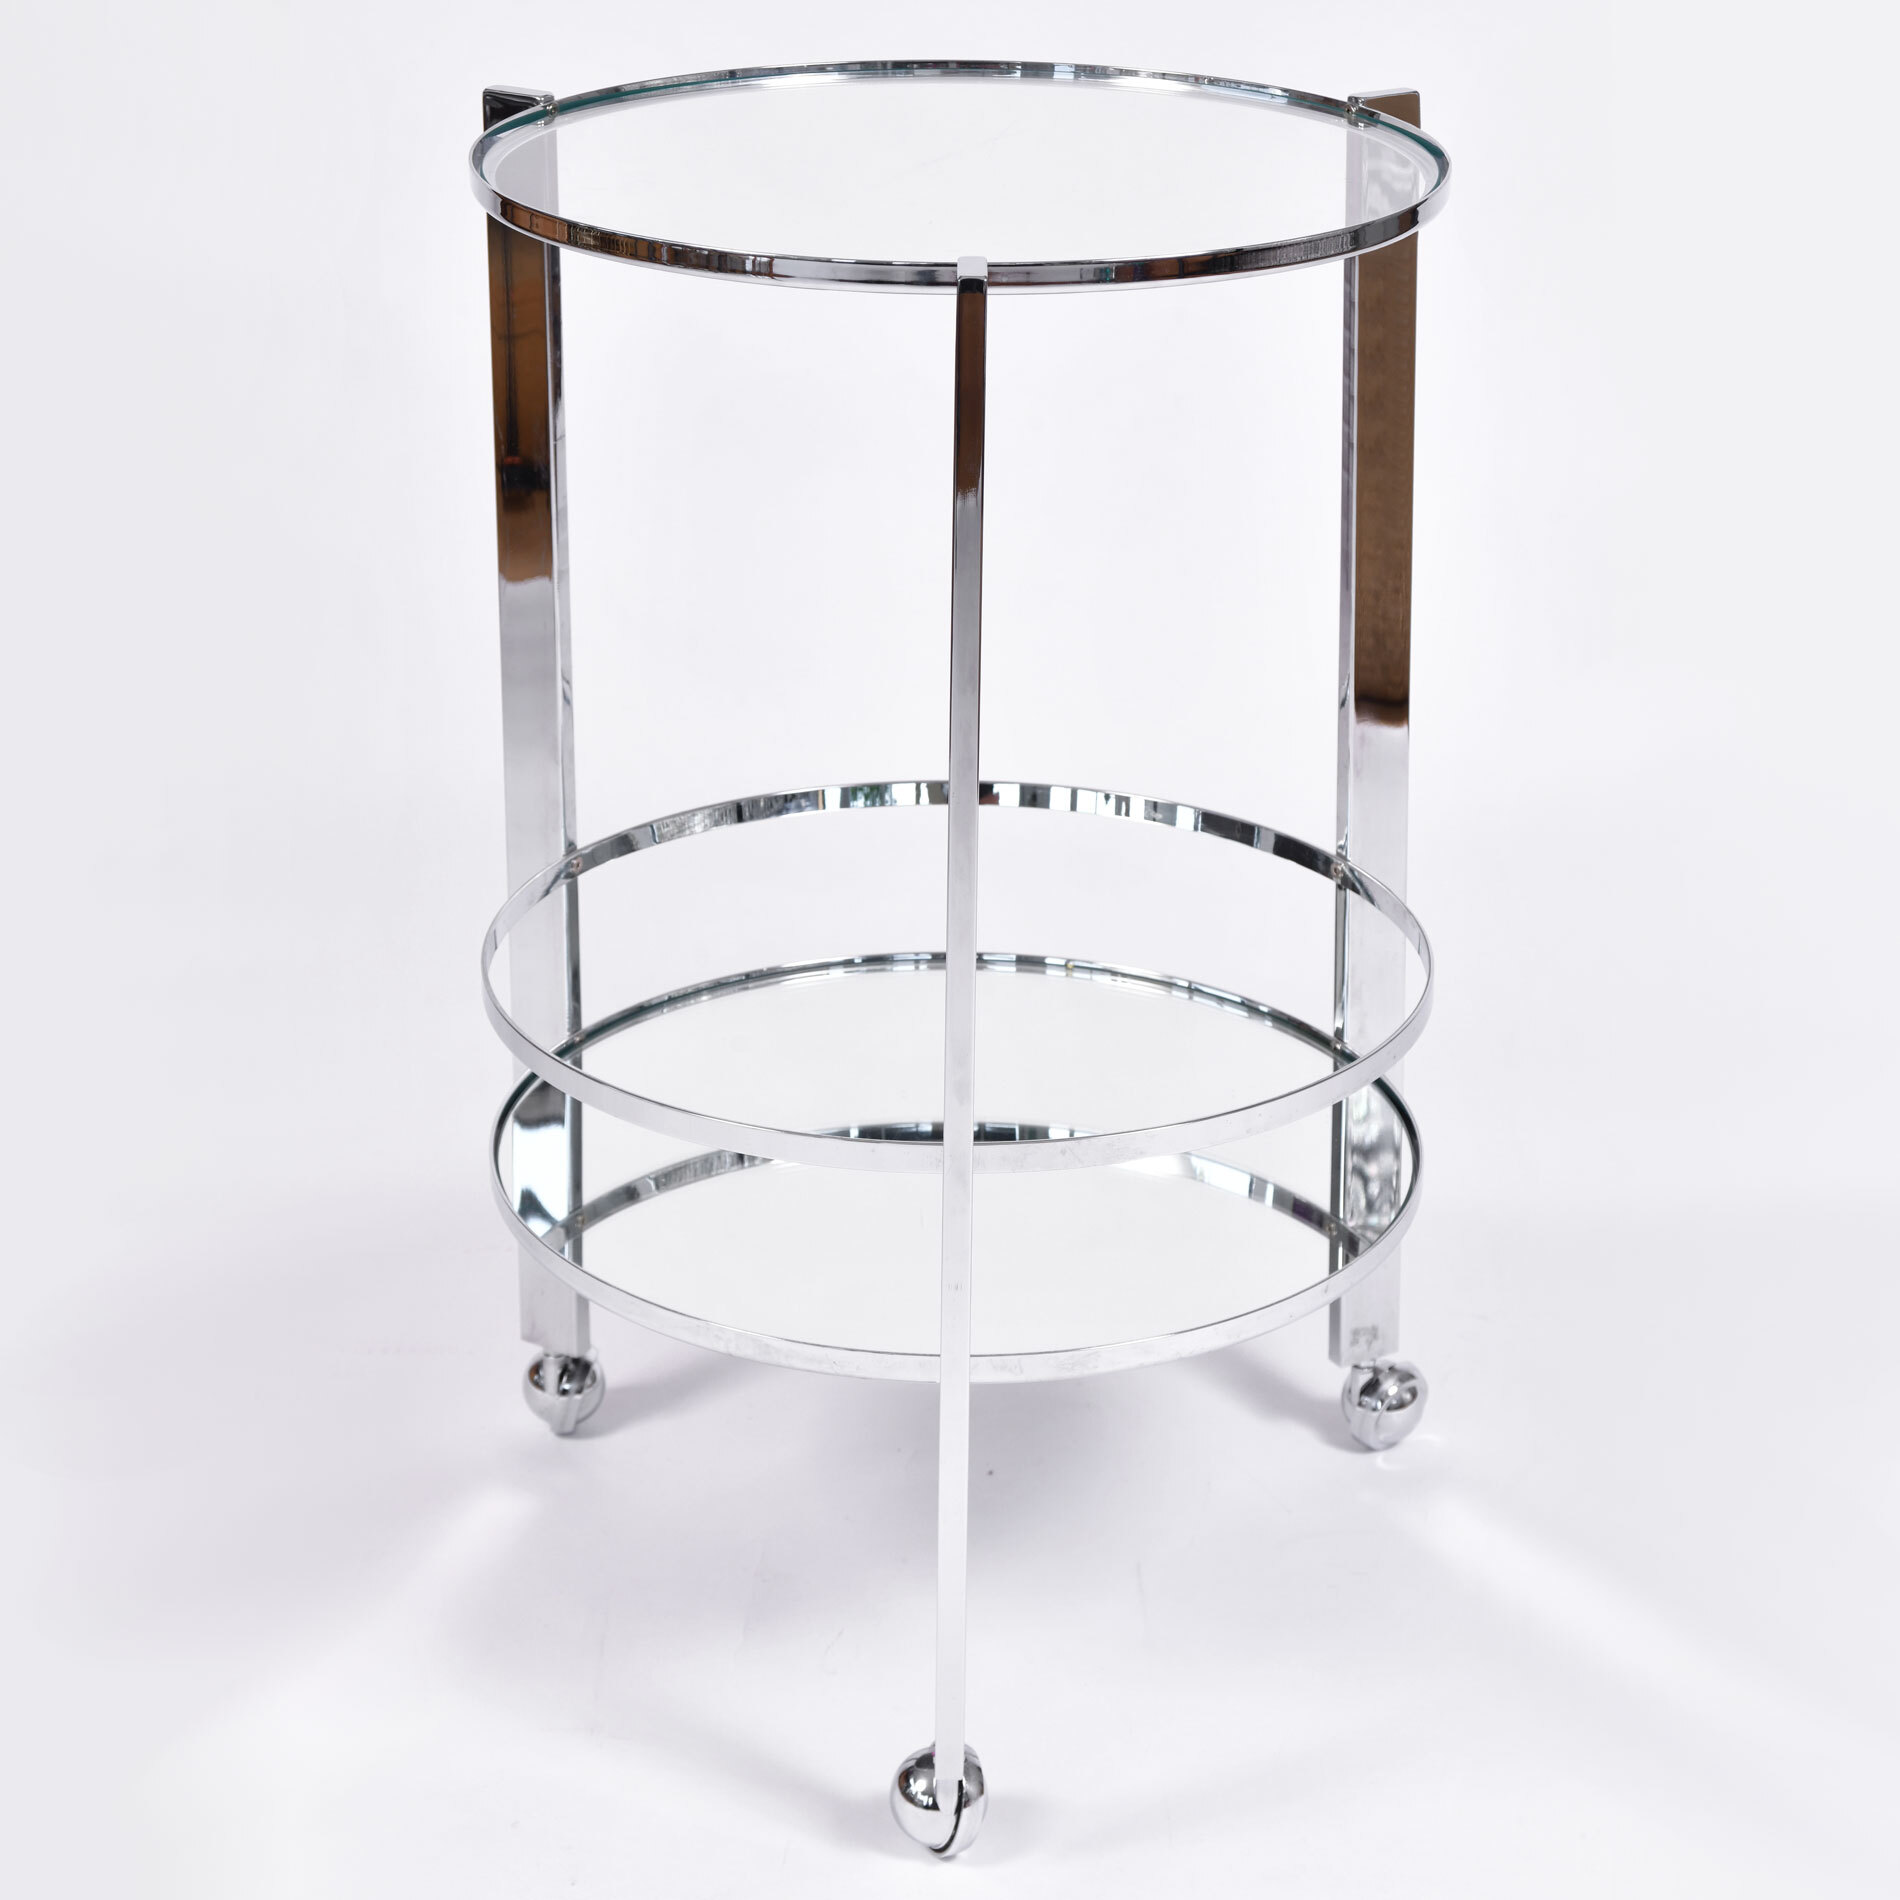 The image for Us Circular Chrome Drinks Trolley 01